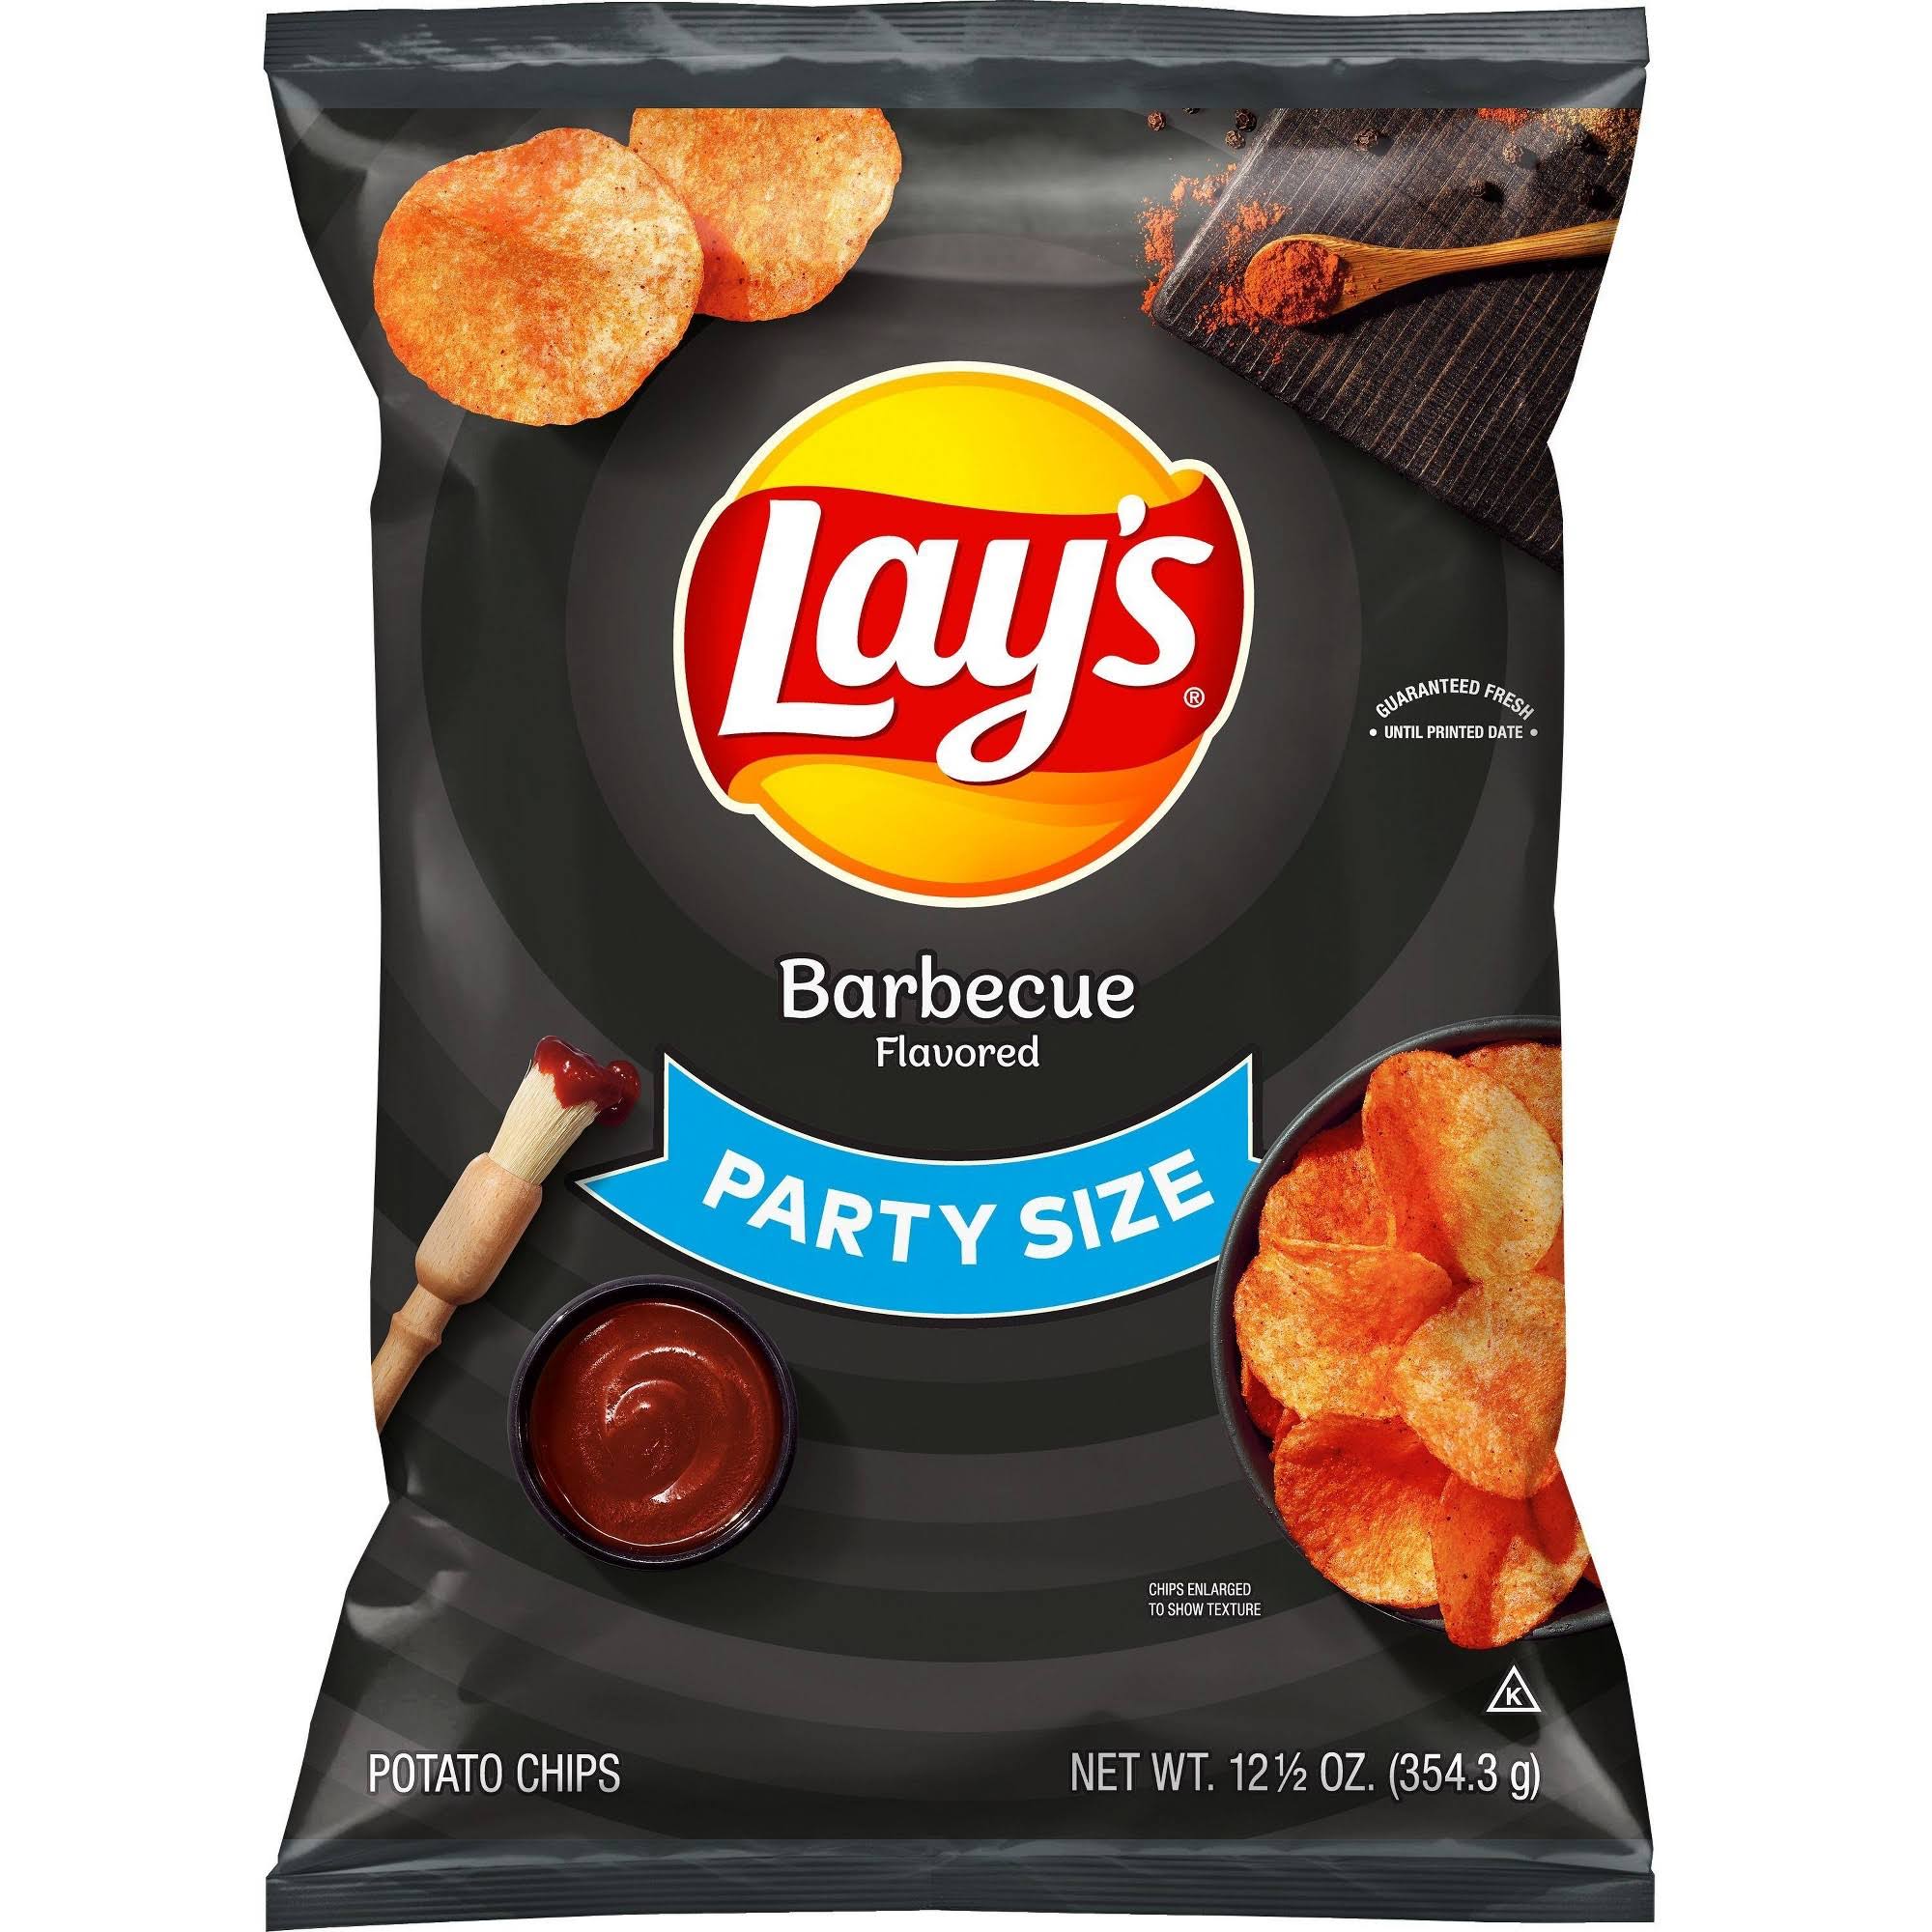 Lay's Potato Chips, Barbecue Flavored, Party Size - 12.5 oz